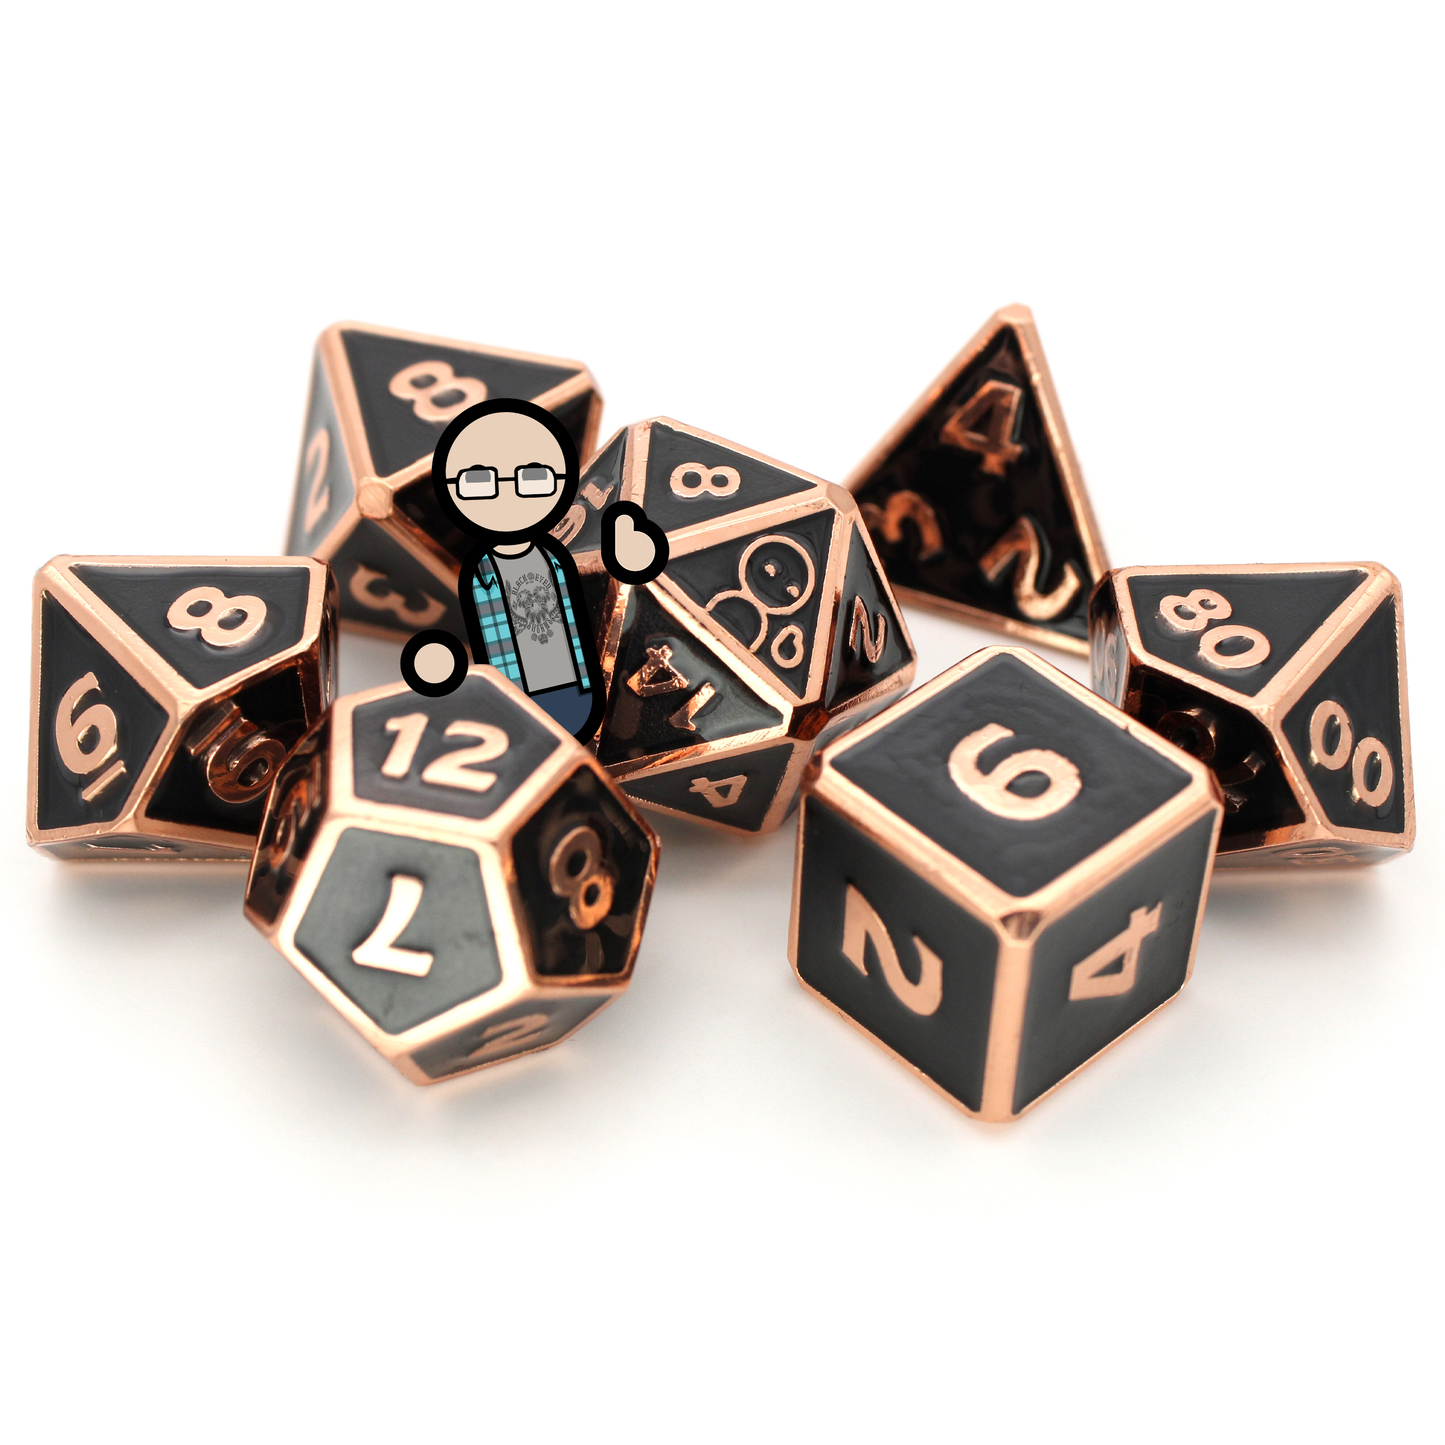 The (Mostly)Neutral DM is a 7-piece rose gold, framed metal set filled with a largely objective, grey enamel. It is part of the Adventure Is Nigh collection, developed in collaboration with The Escapist.